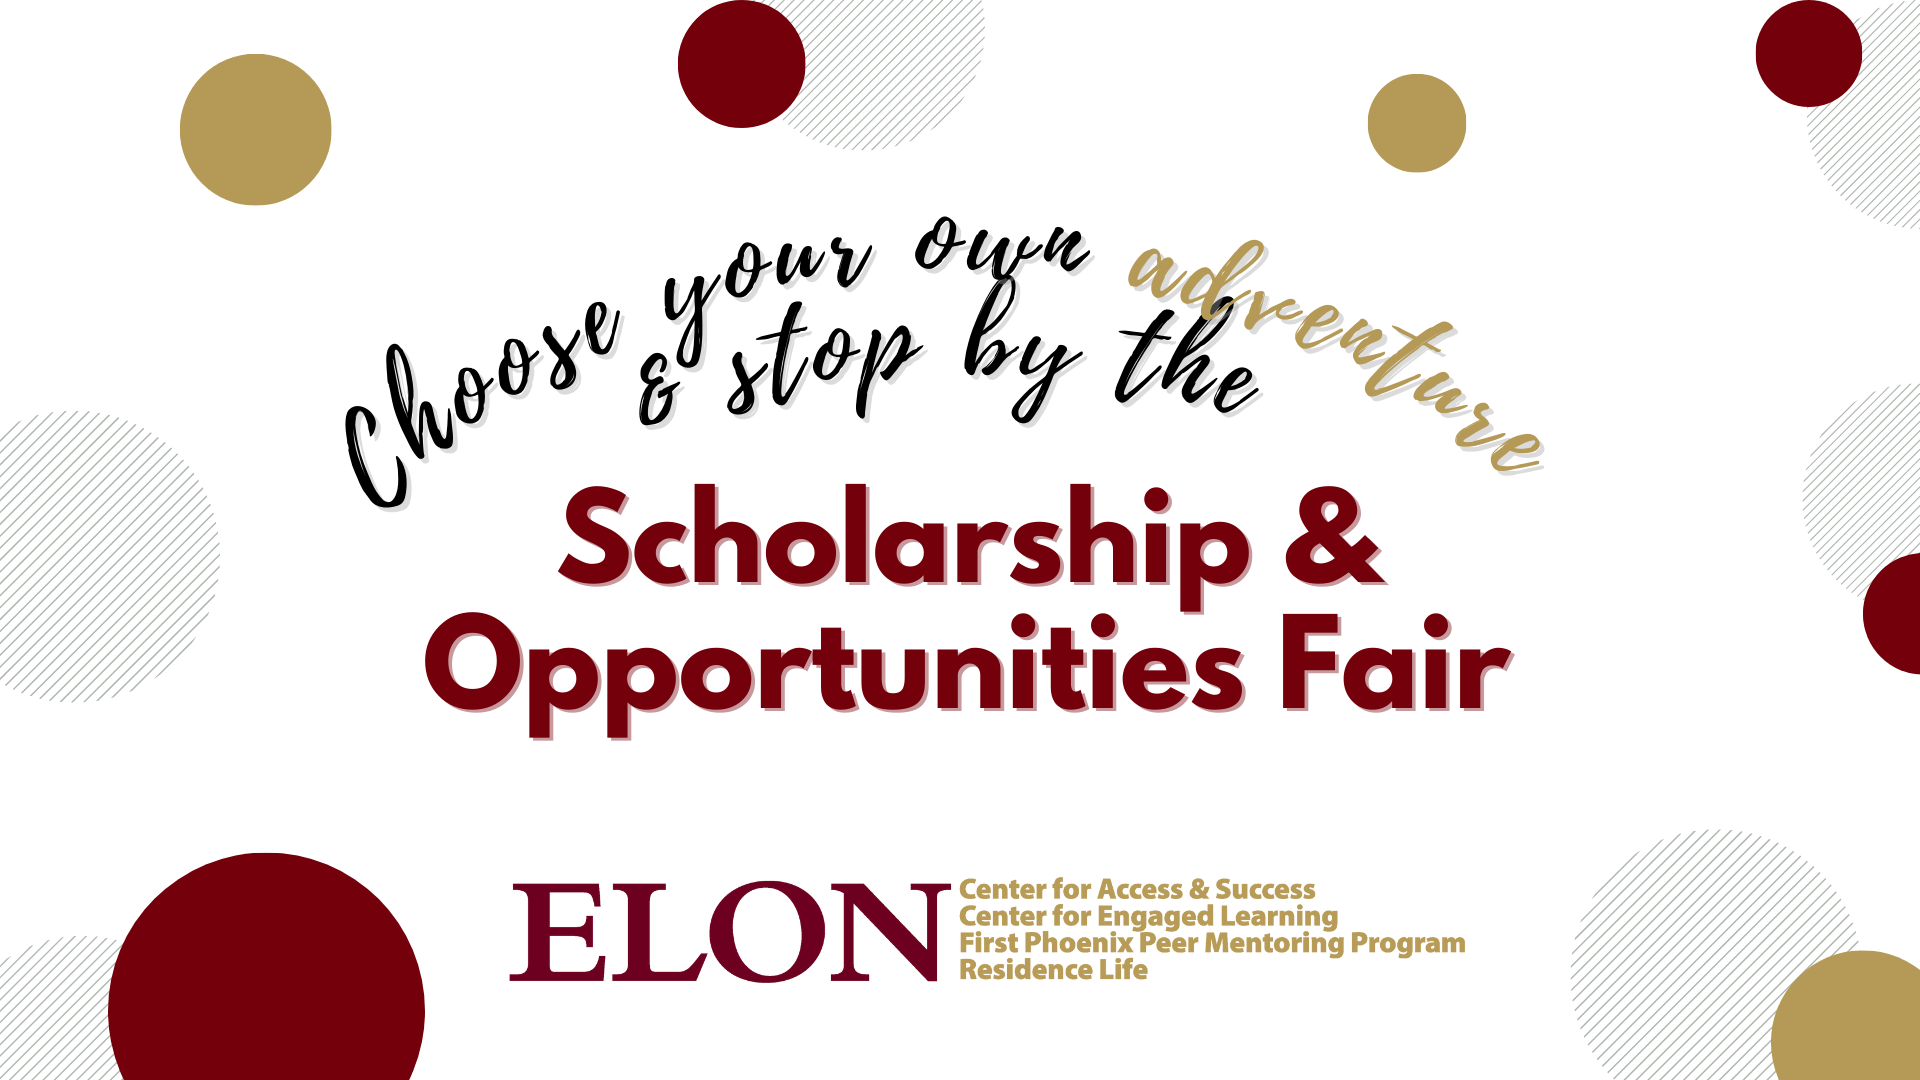 Maroon and gold circles; Text reads: "Choose your own adventure & stop by the Scholarship & Opportunities Fair".